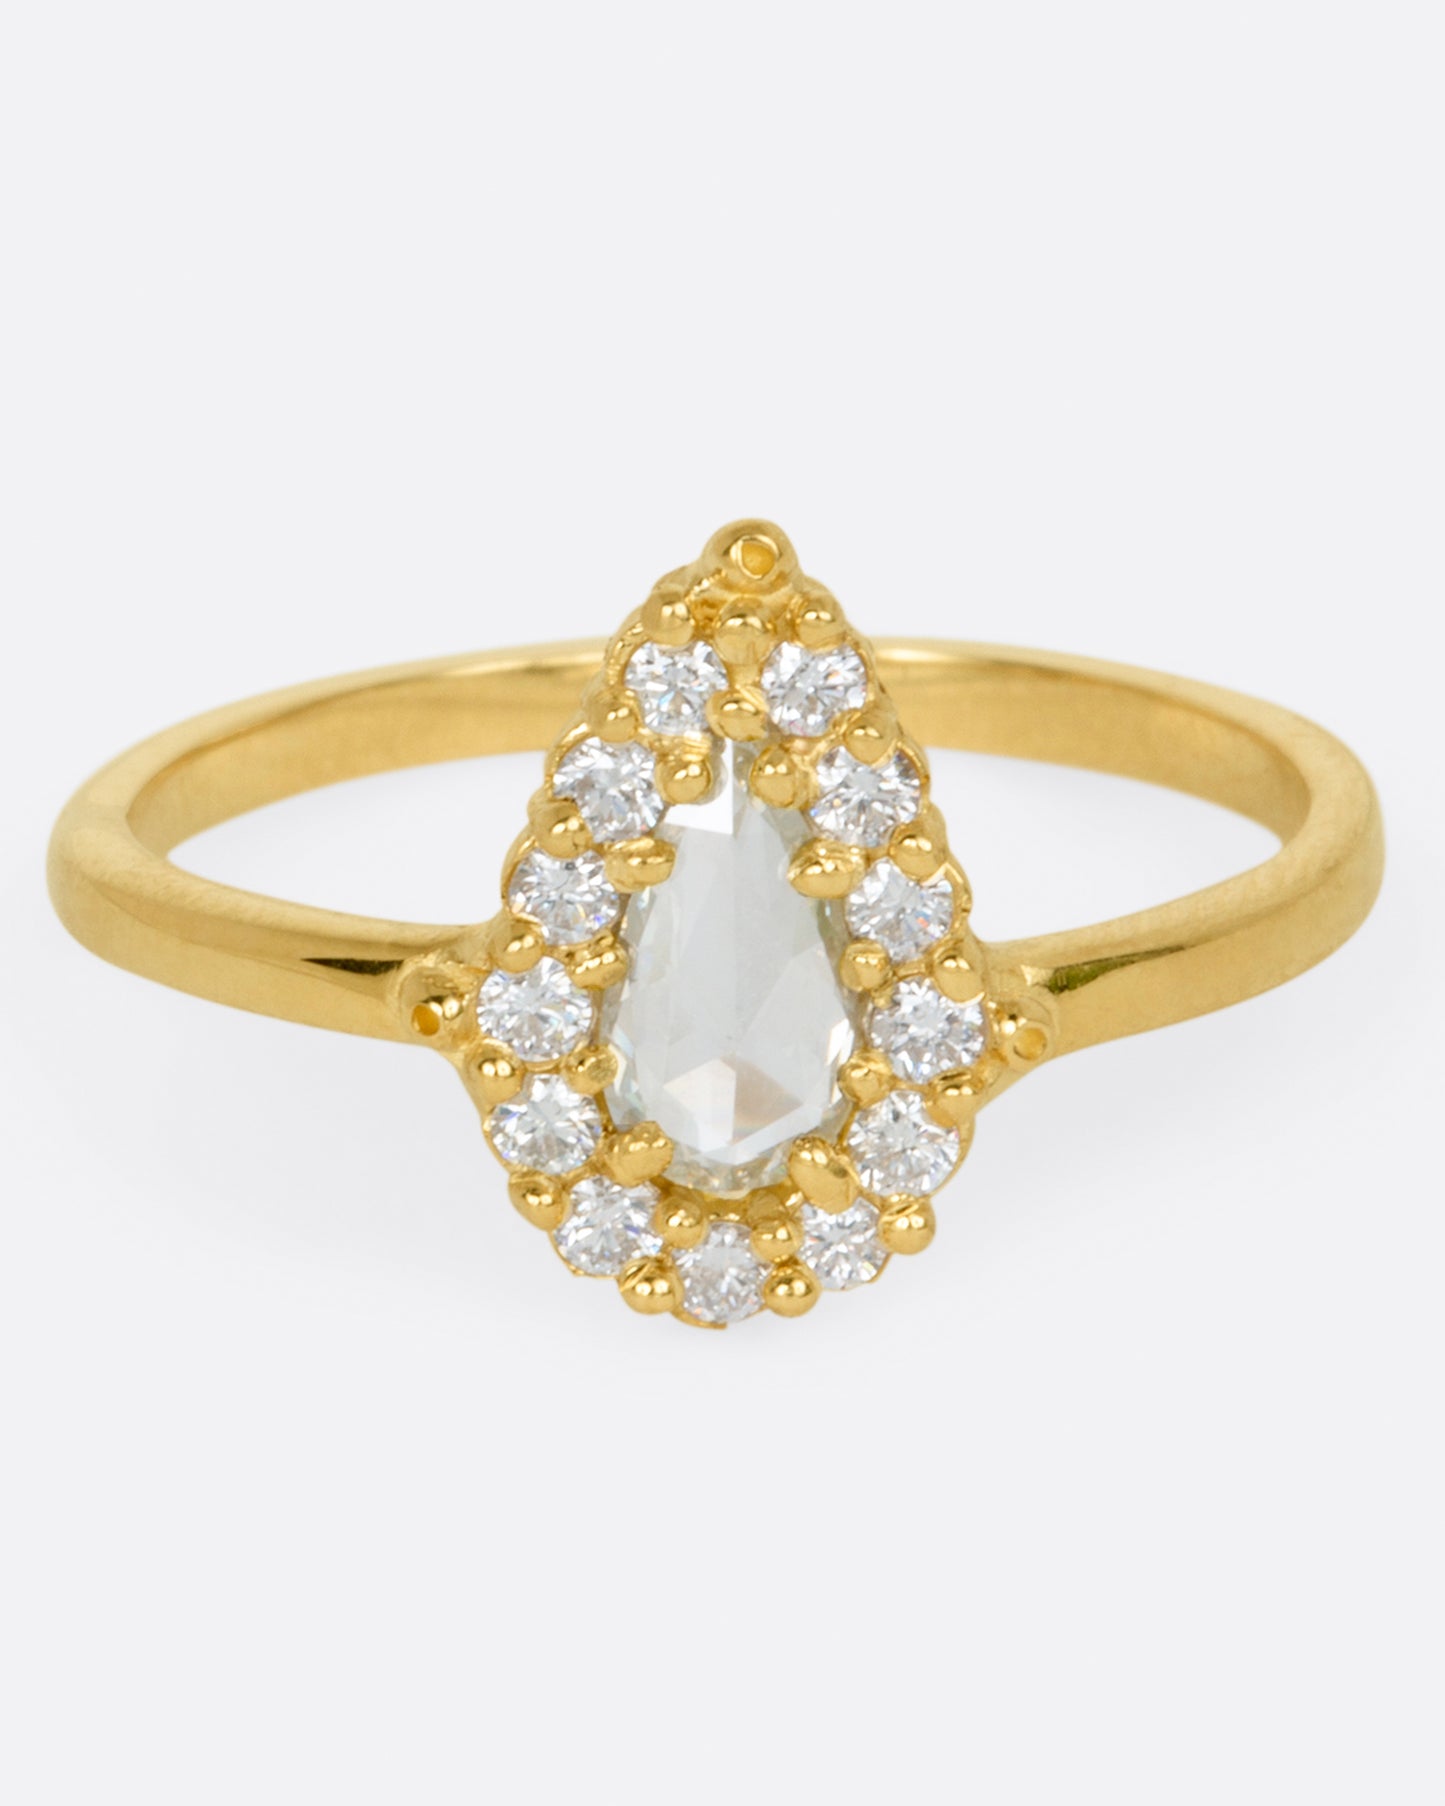 A light champagne, rose cut, pear shaped diamond ring with a round diamond halo.